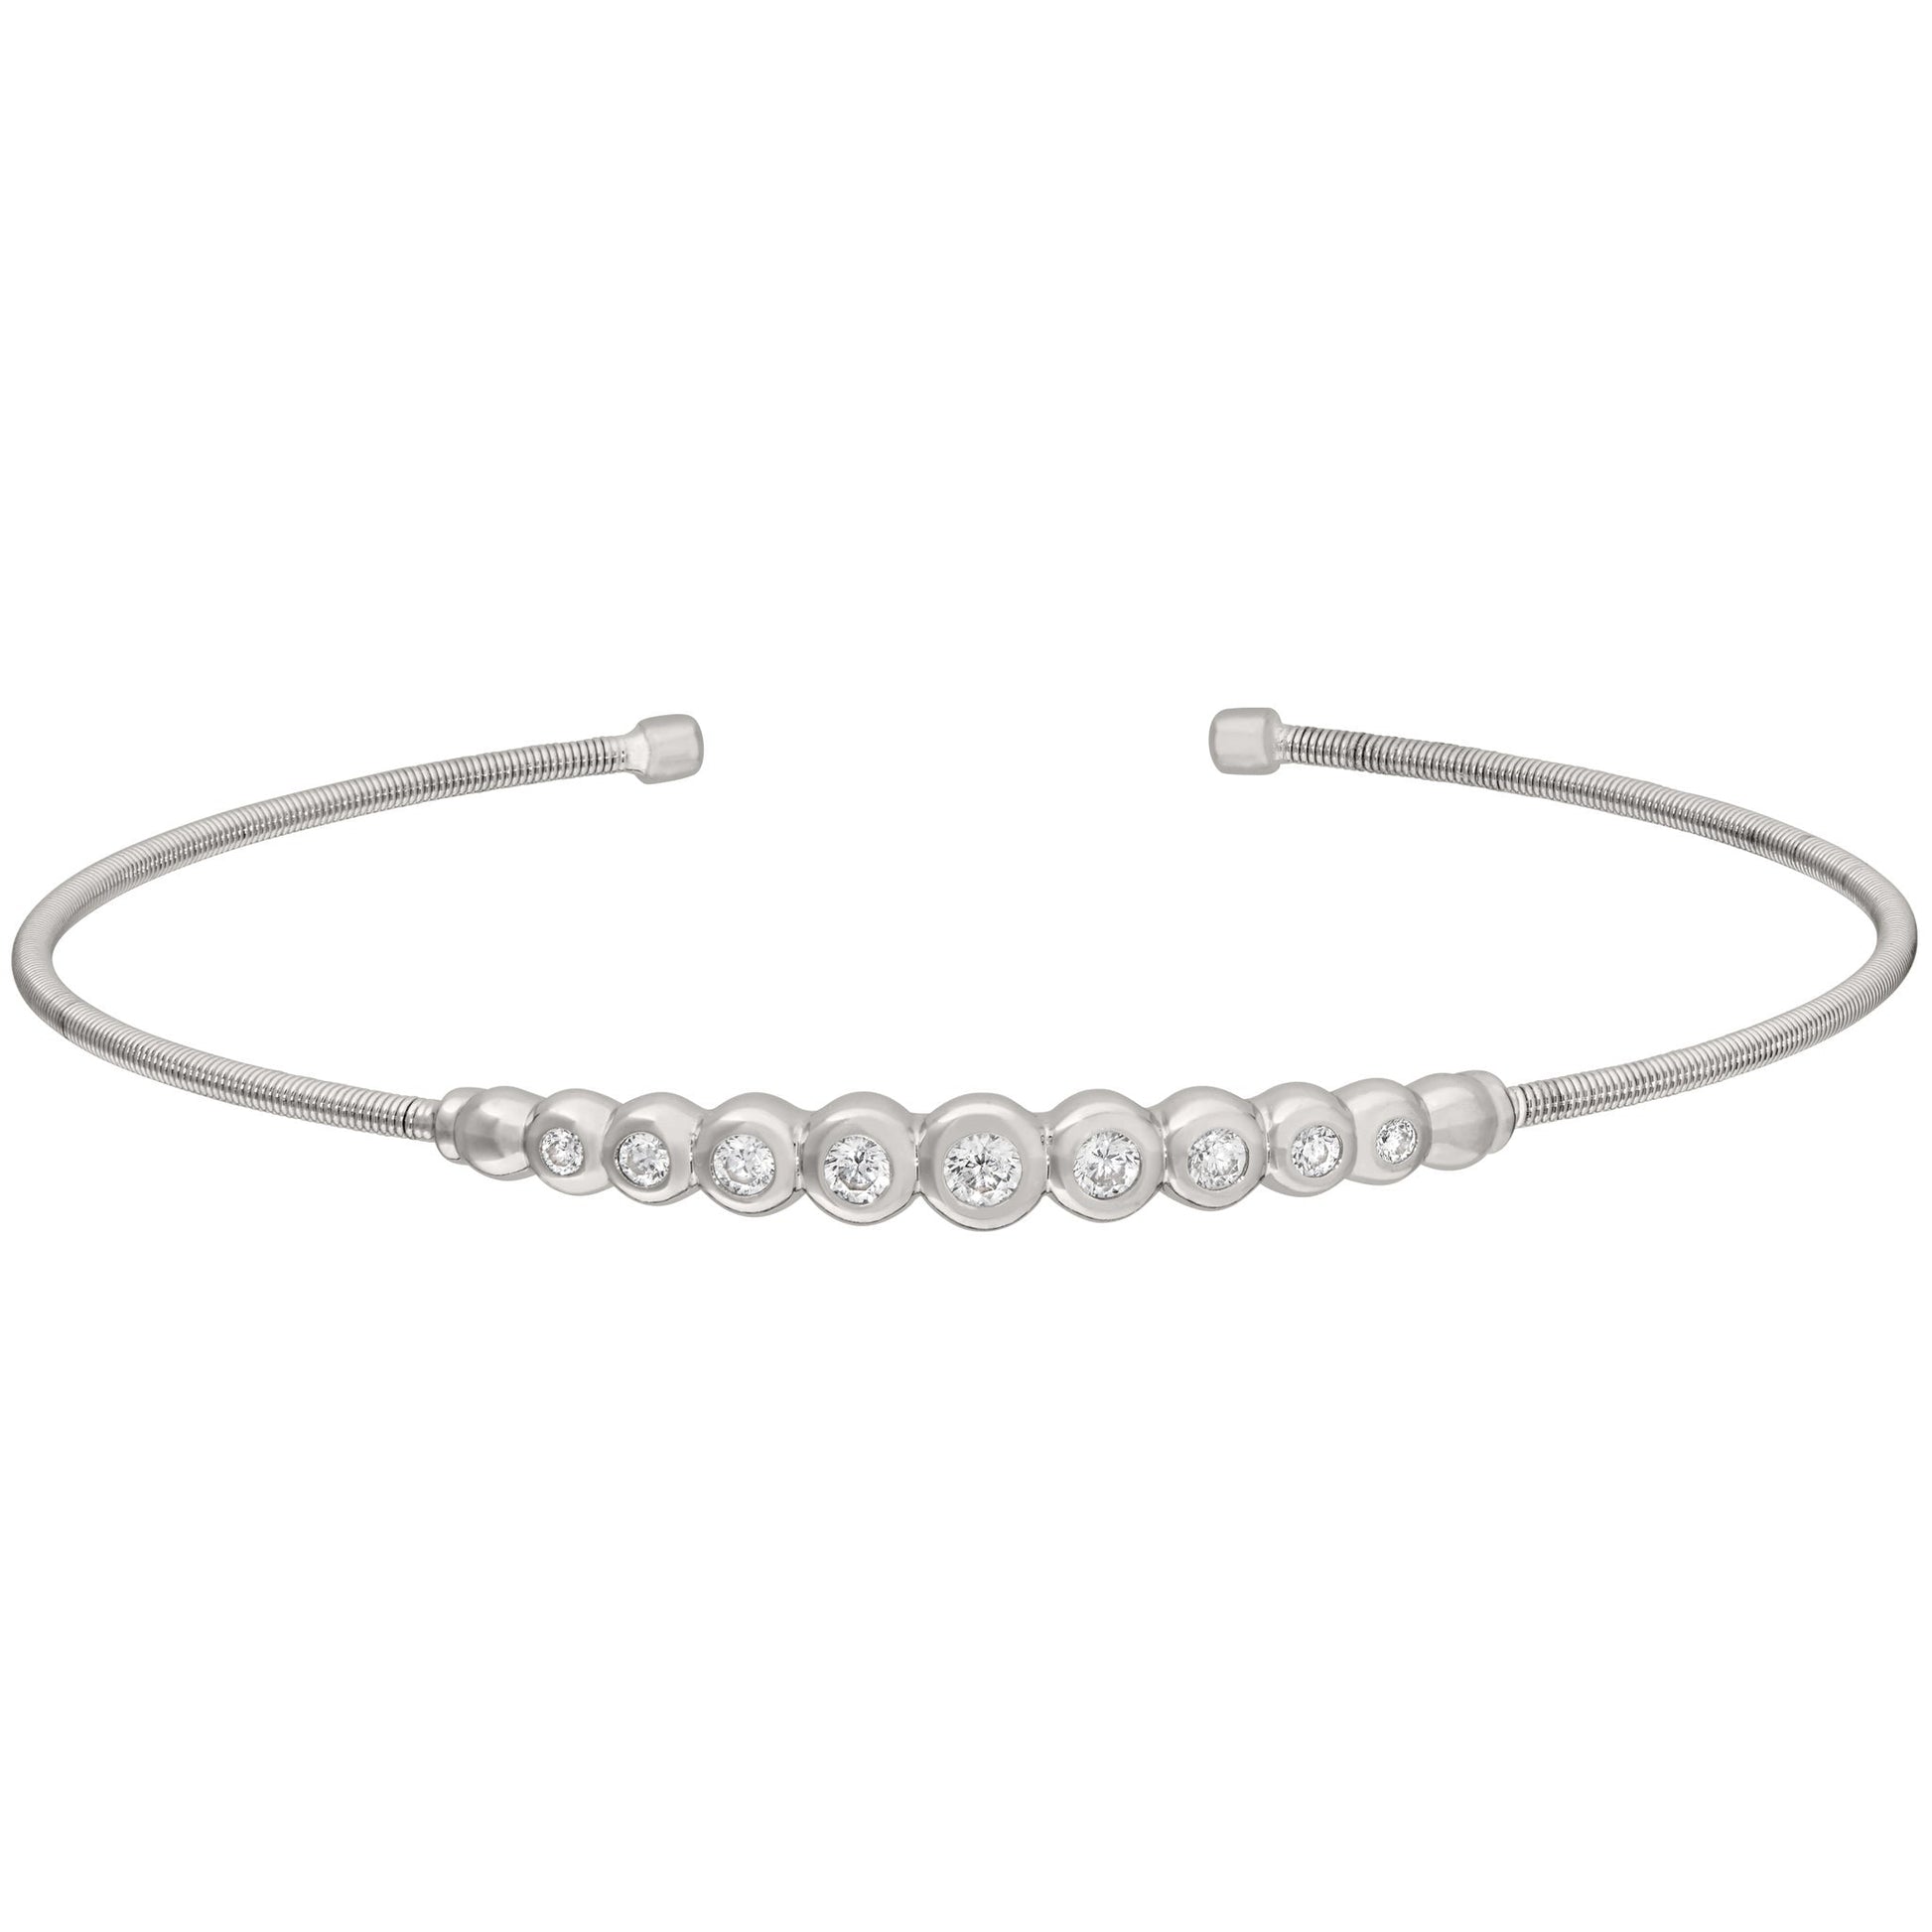 A flexible cable bracelet with graduated simulated diamonds displayed on a neutral white background.